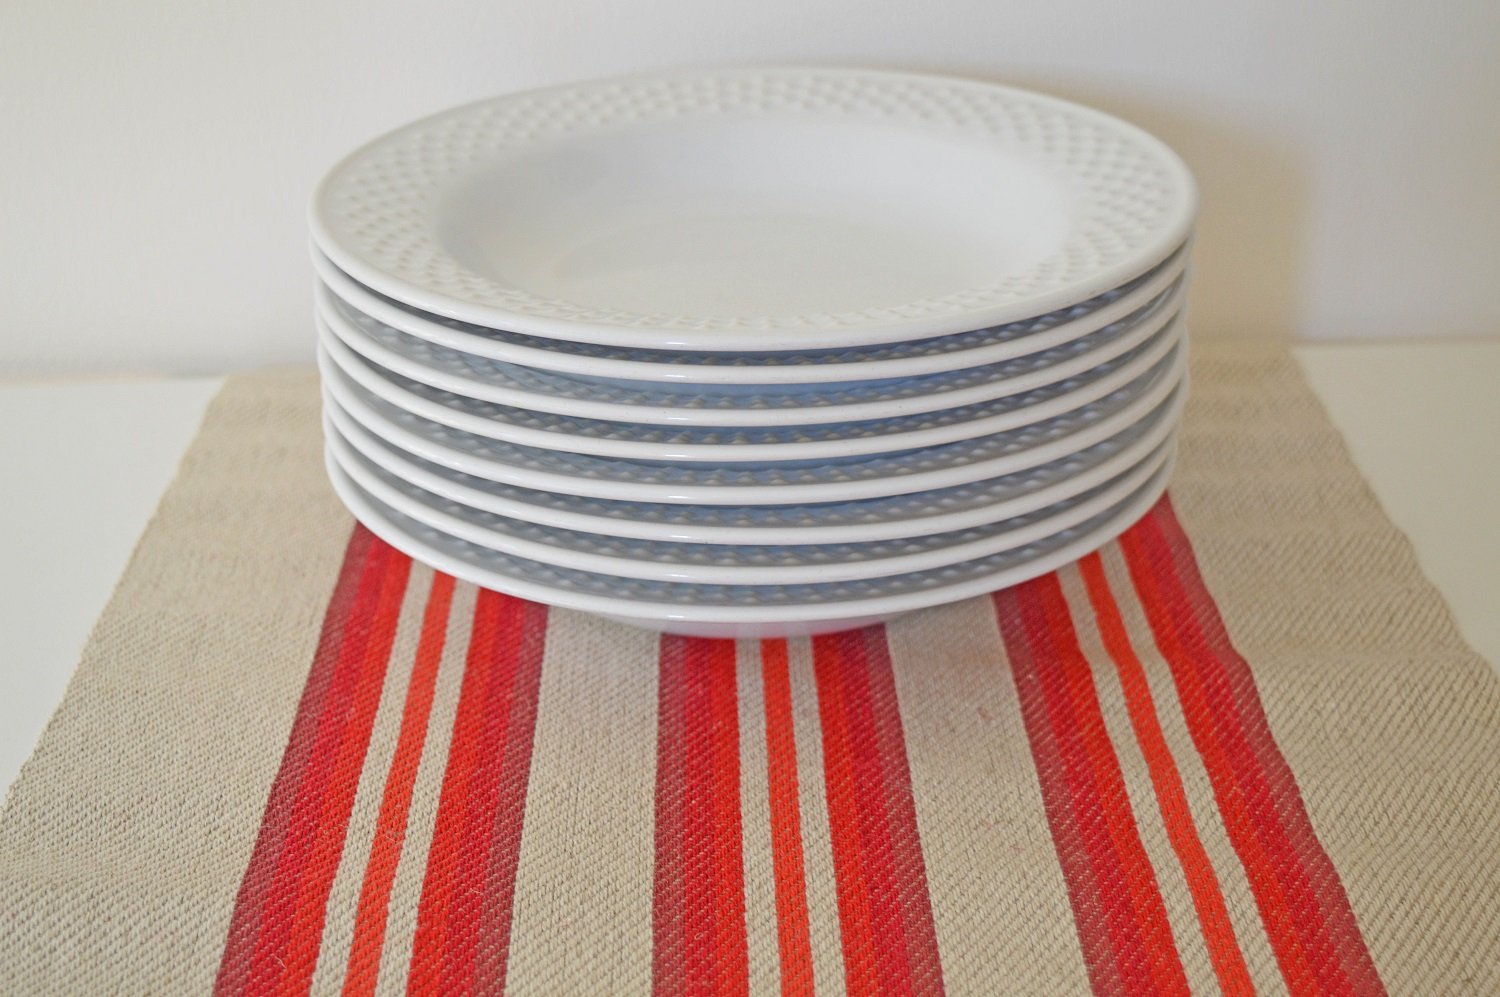 plates on a red table runner.jpg